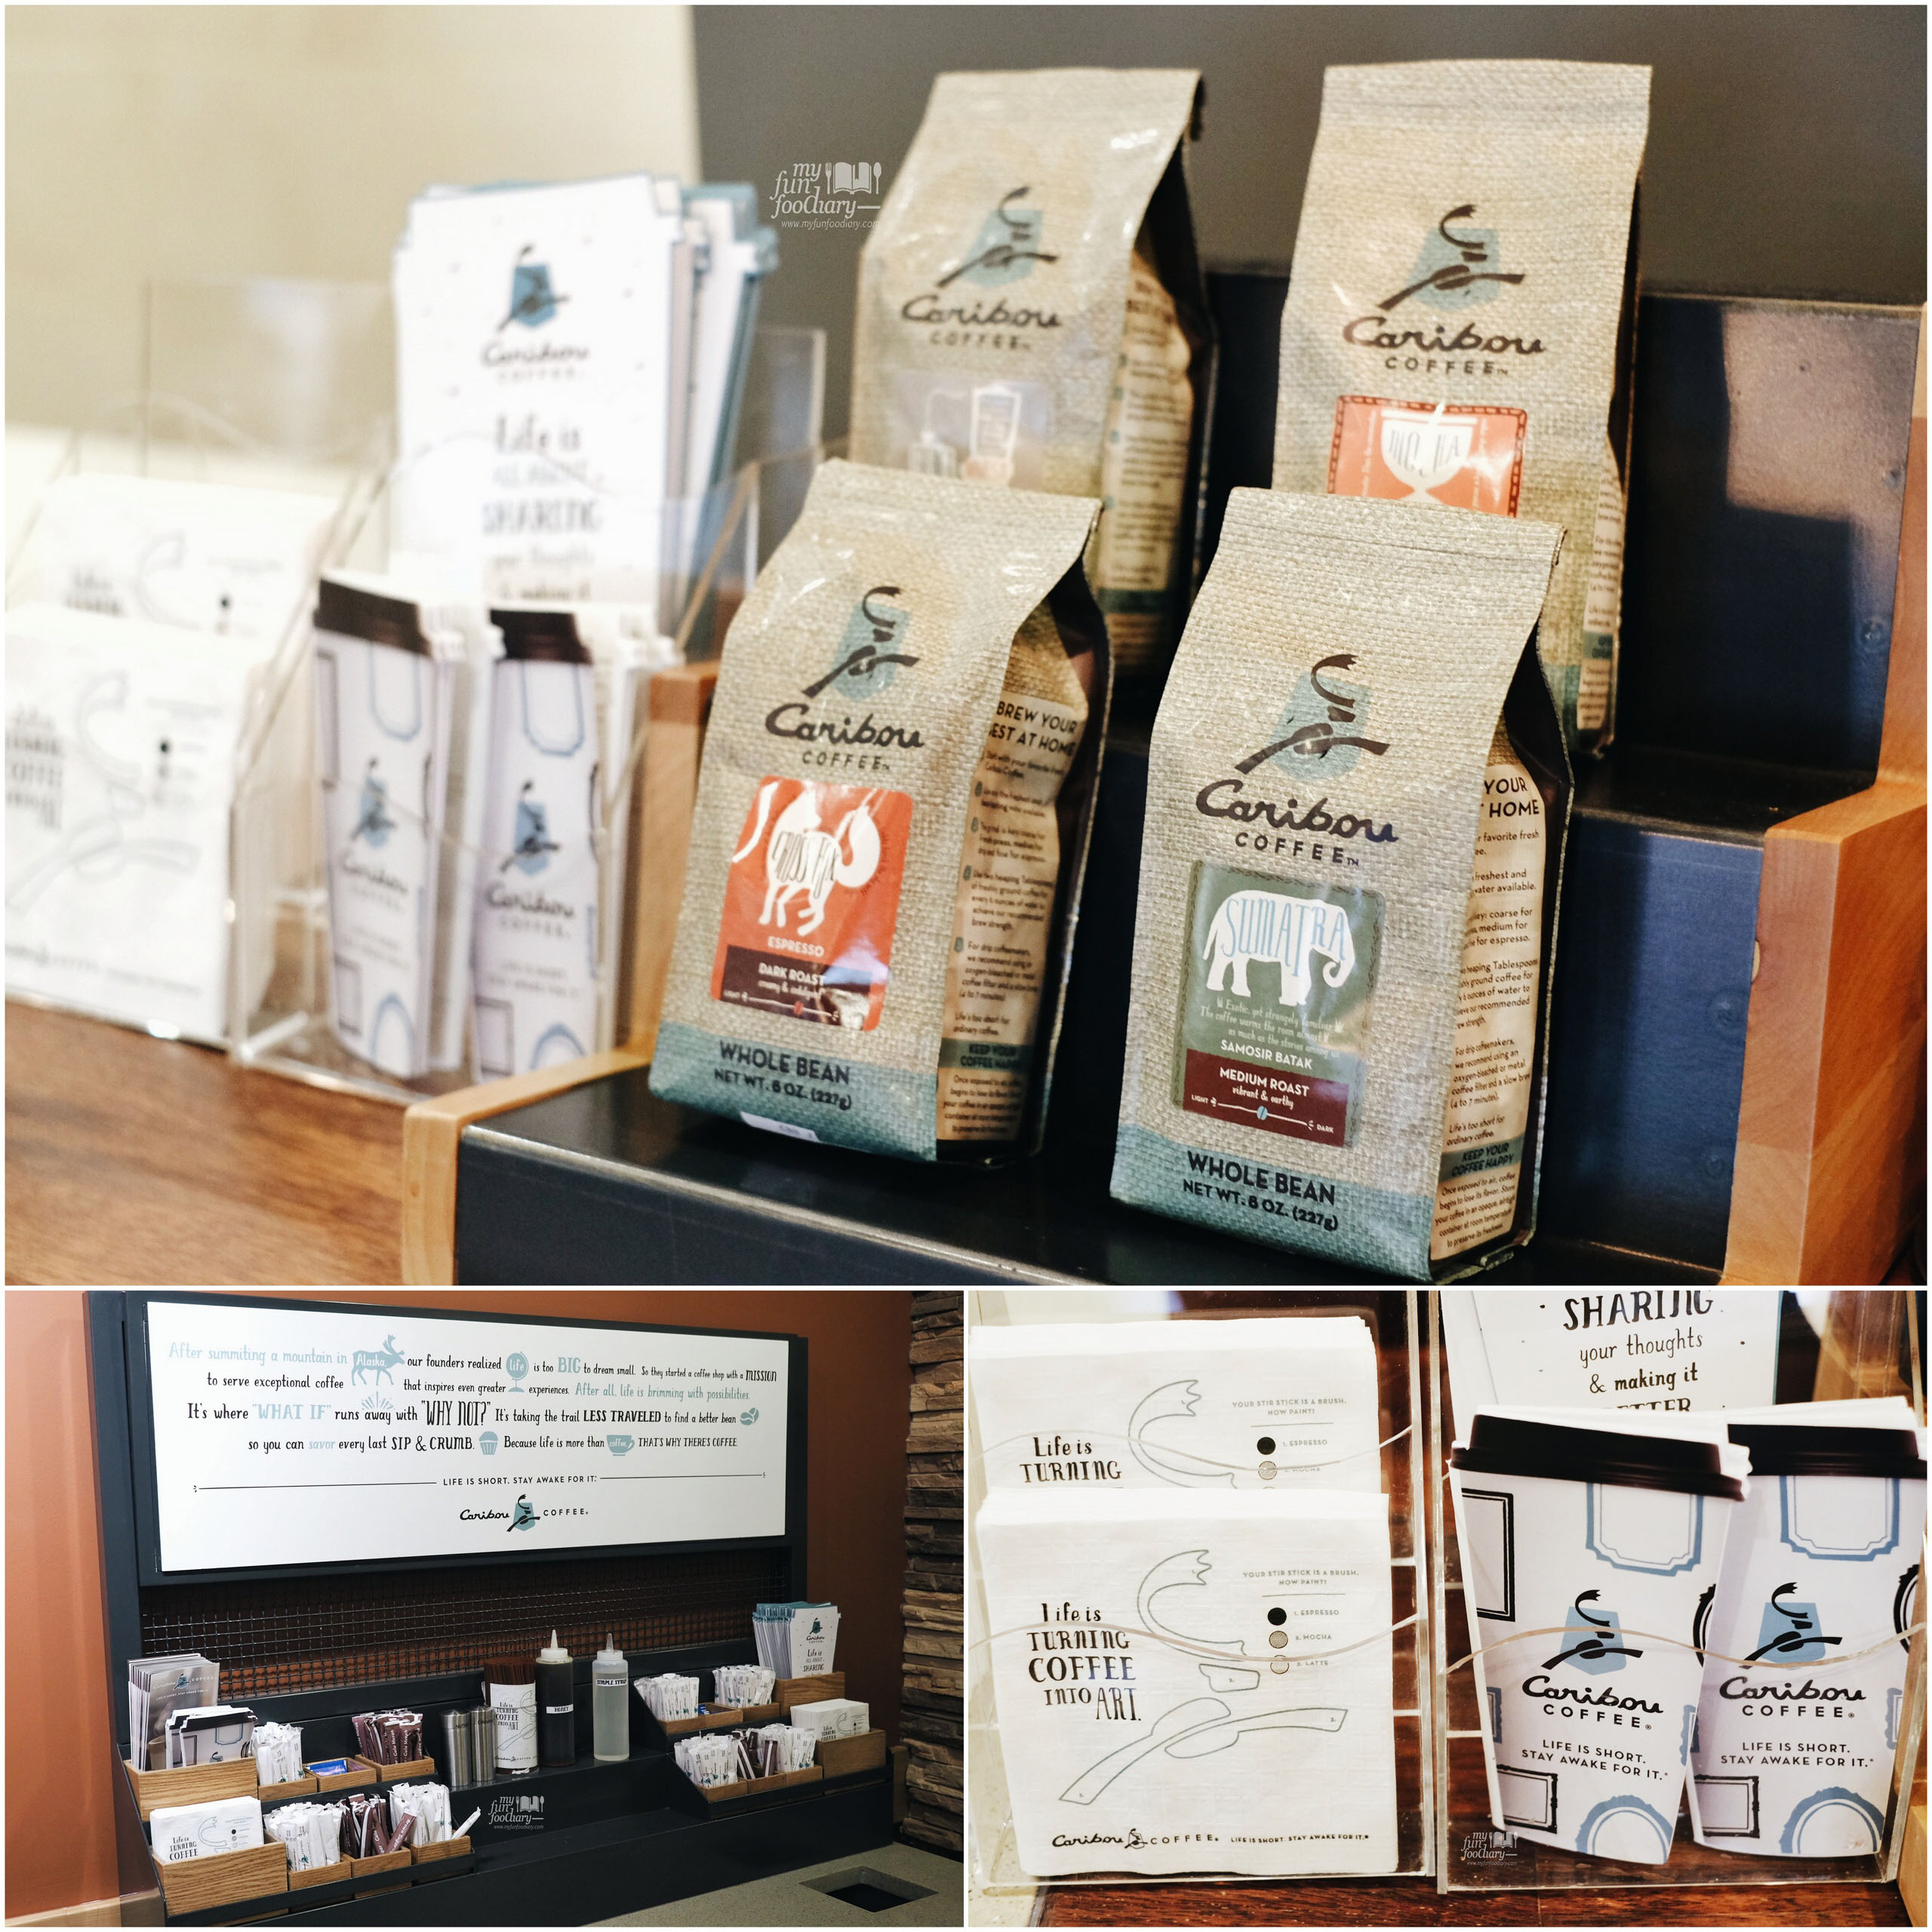 Beans and all packaging well-designed at Caribou Coffee Senopati by Myfunfoodiary